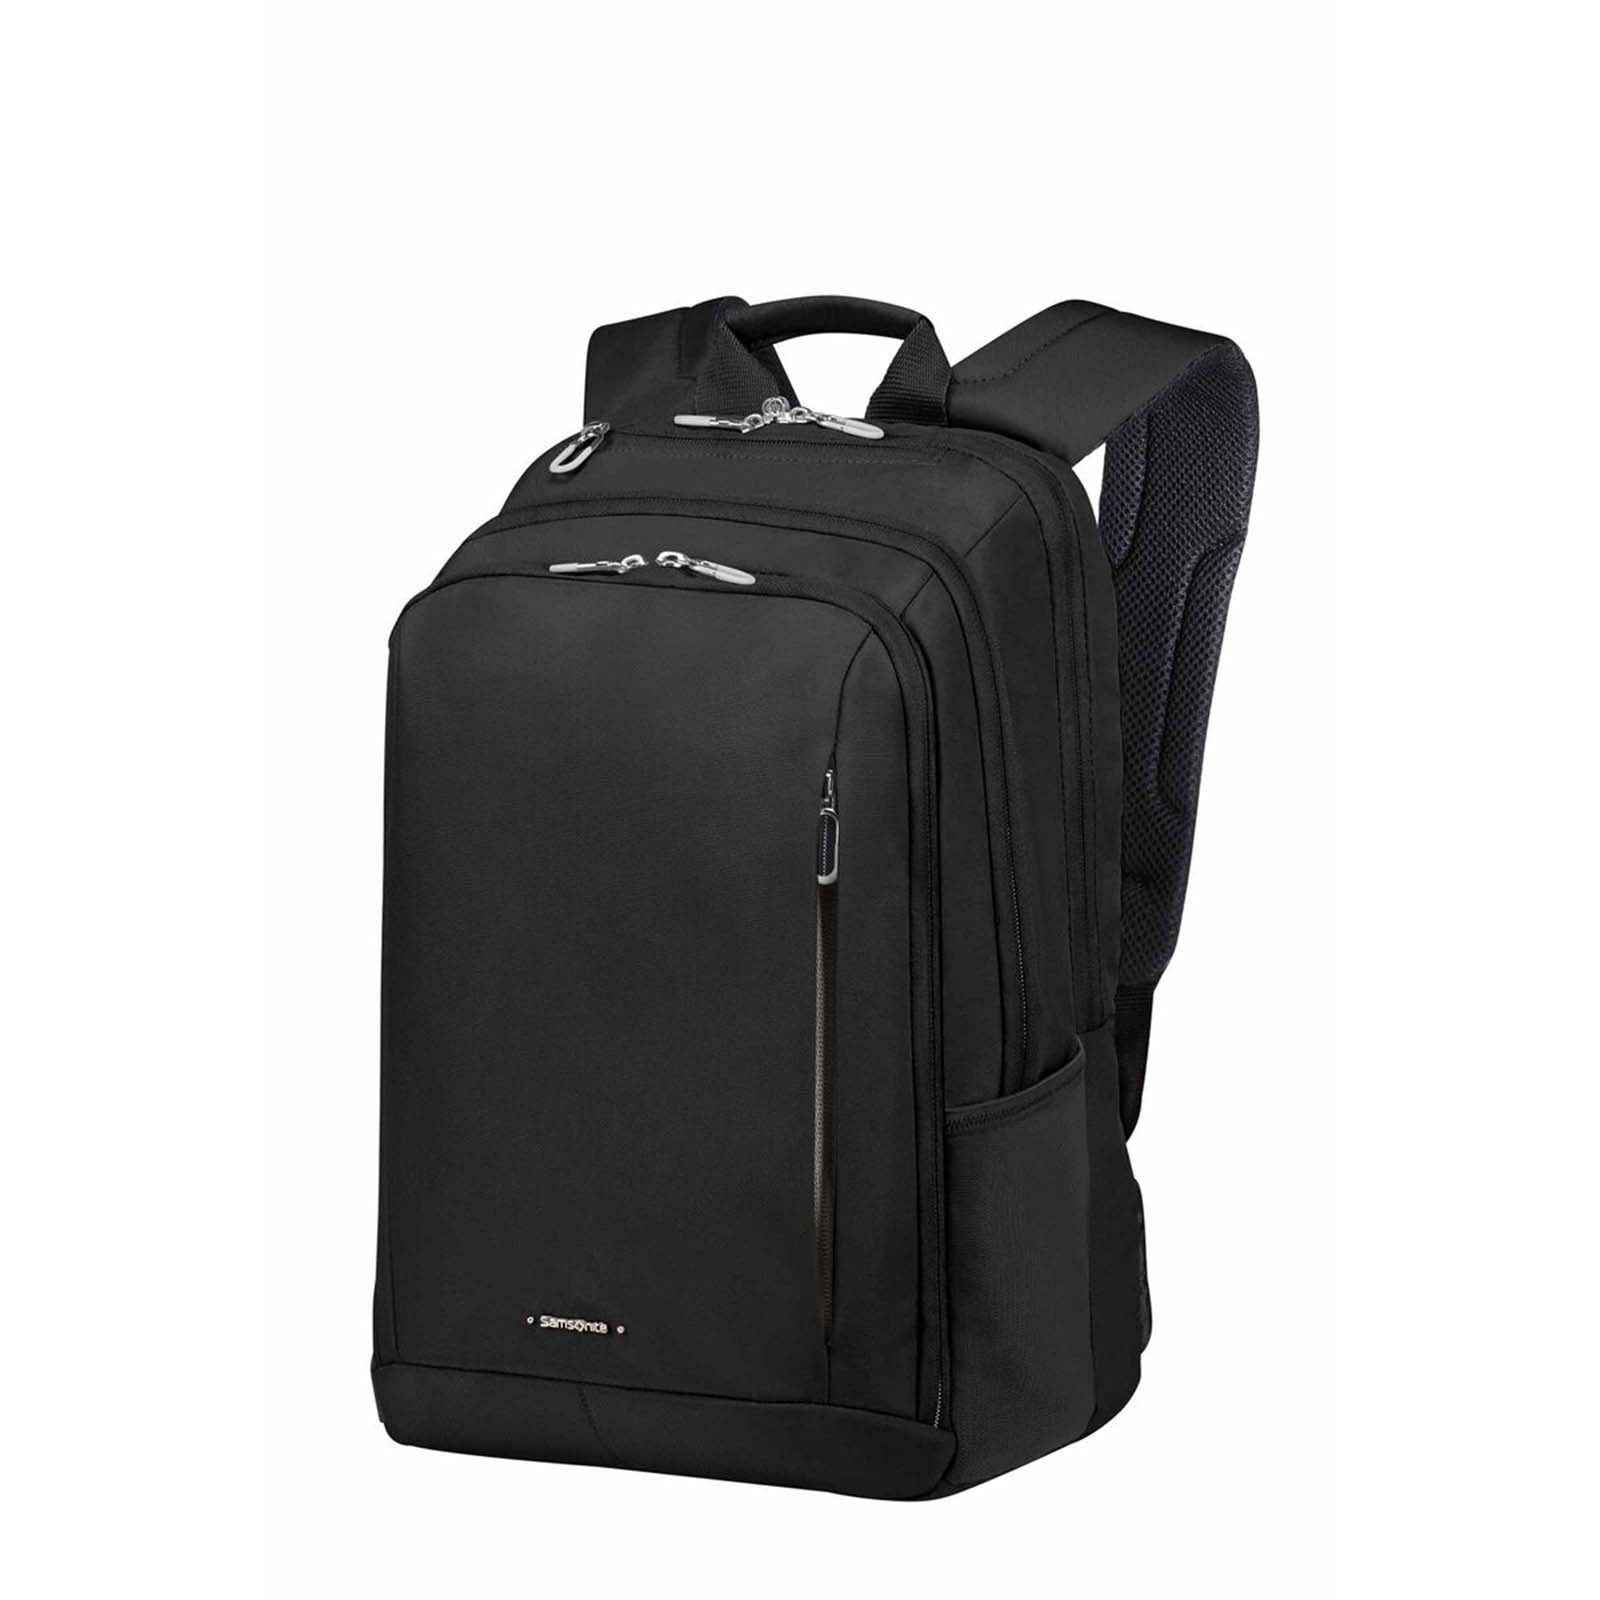 Samsonite-Guardit-Classy-15-Inch-Laptop-Backpack-Black-Front-Angle